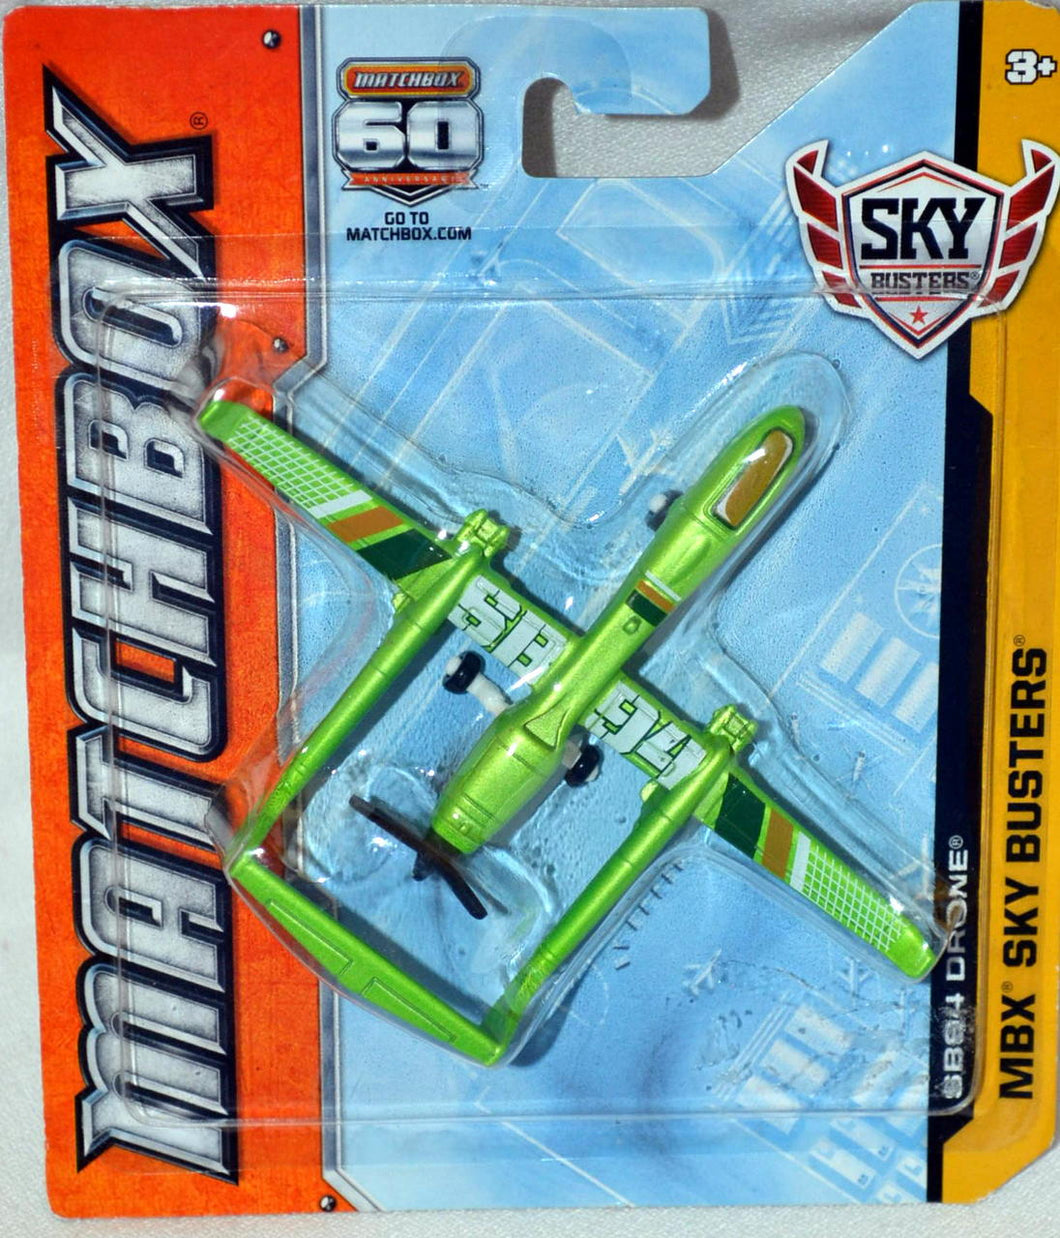 Matchbox 2012 SB94 Drone Green Airplance MBX Sky Busters (60Th Anniversary Edition)